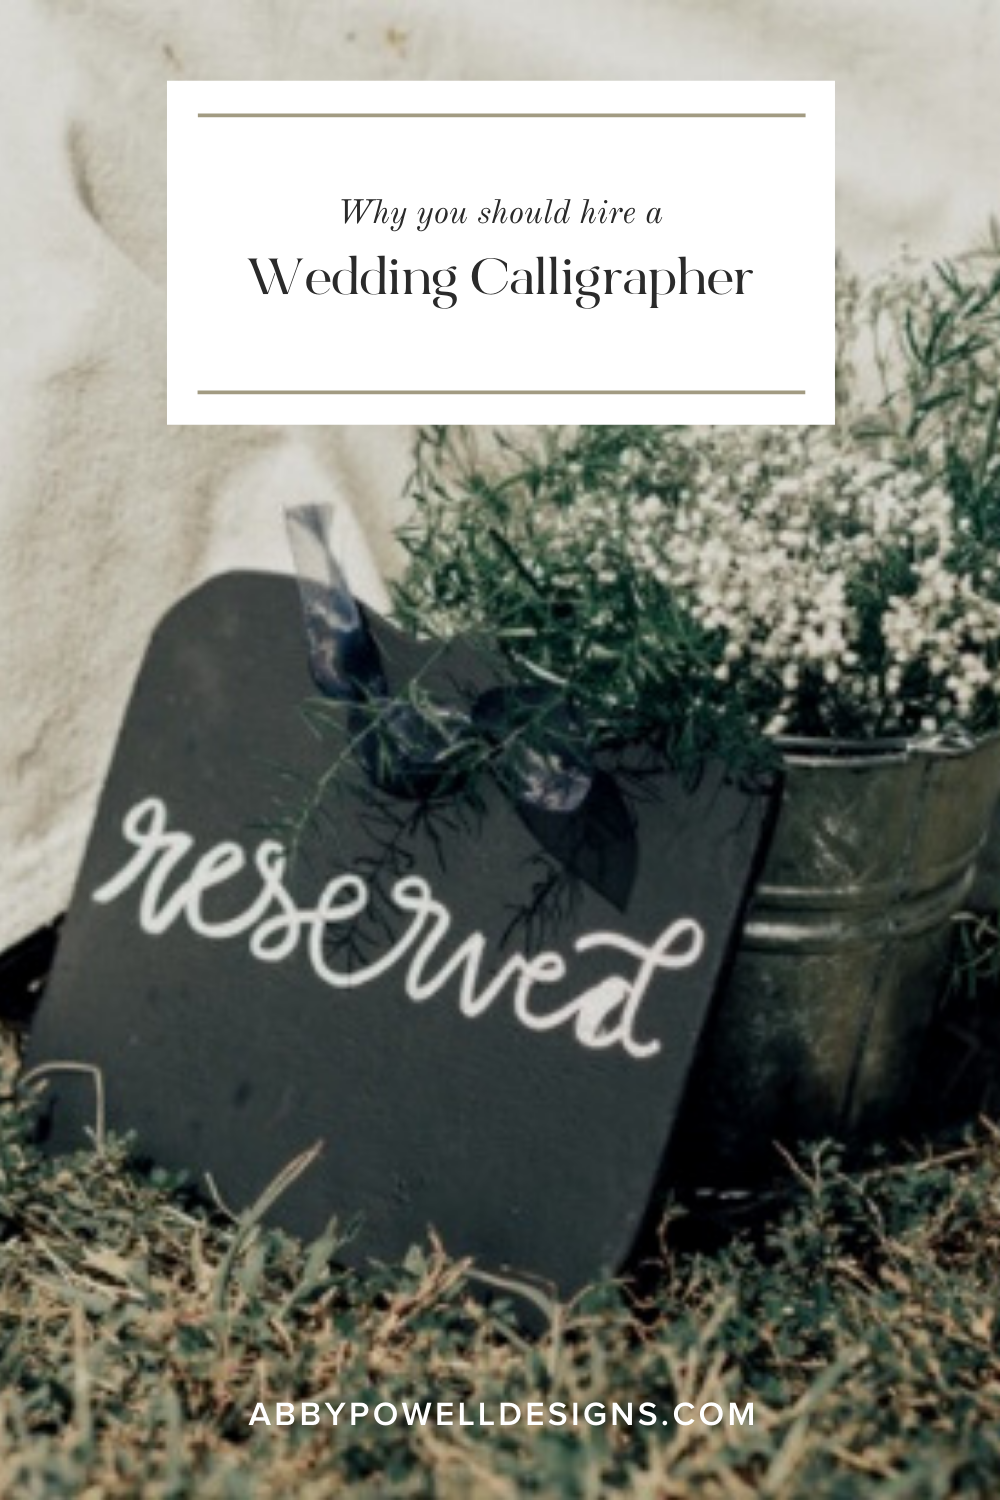 Hire a wedding calligrapher for your big day!